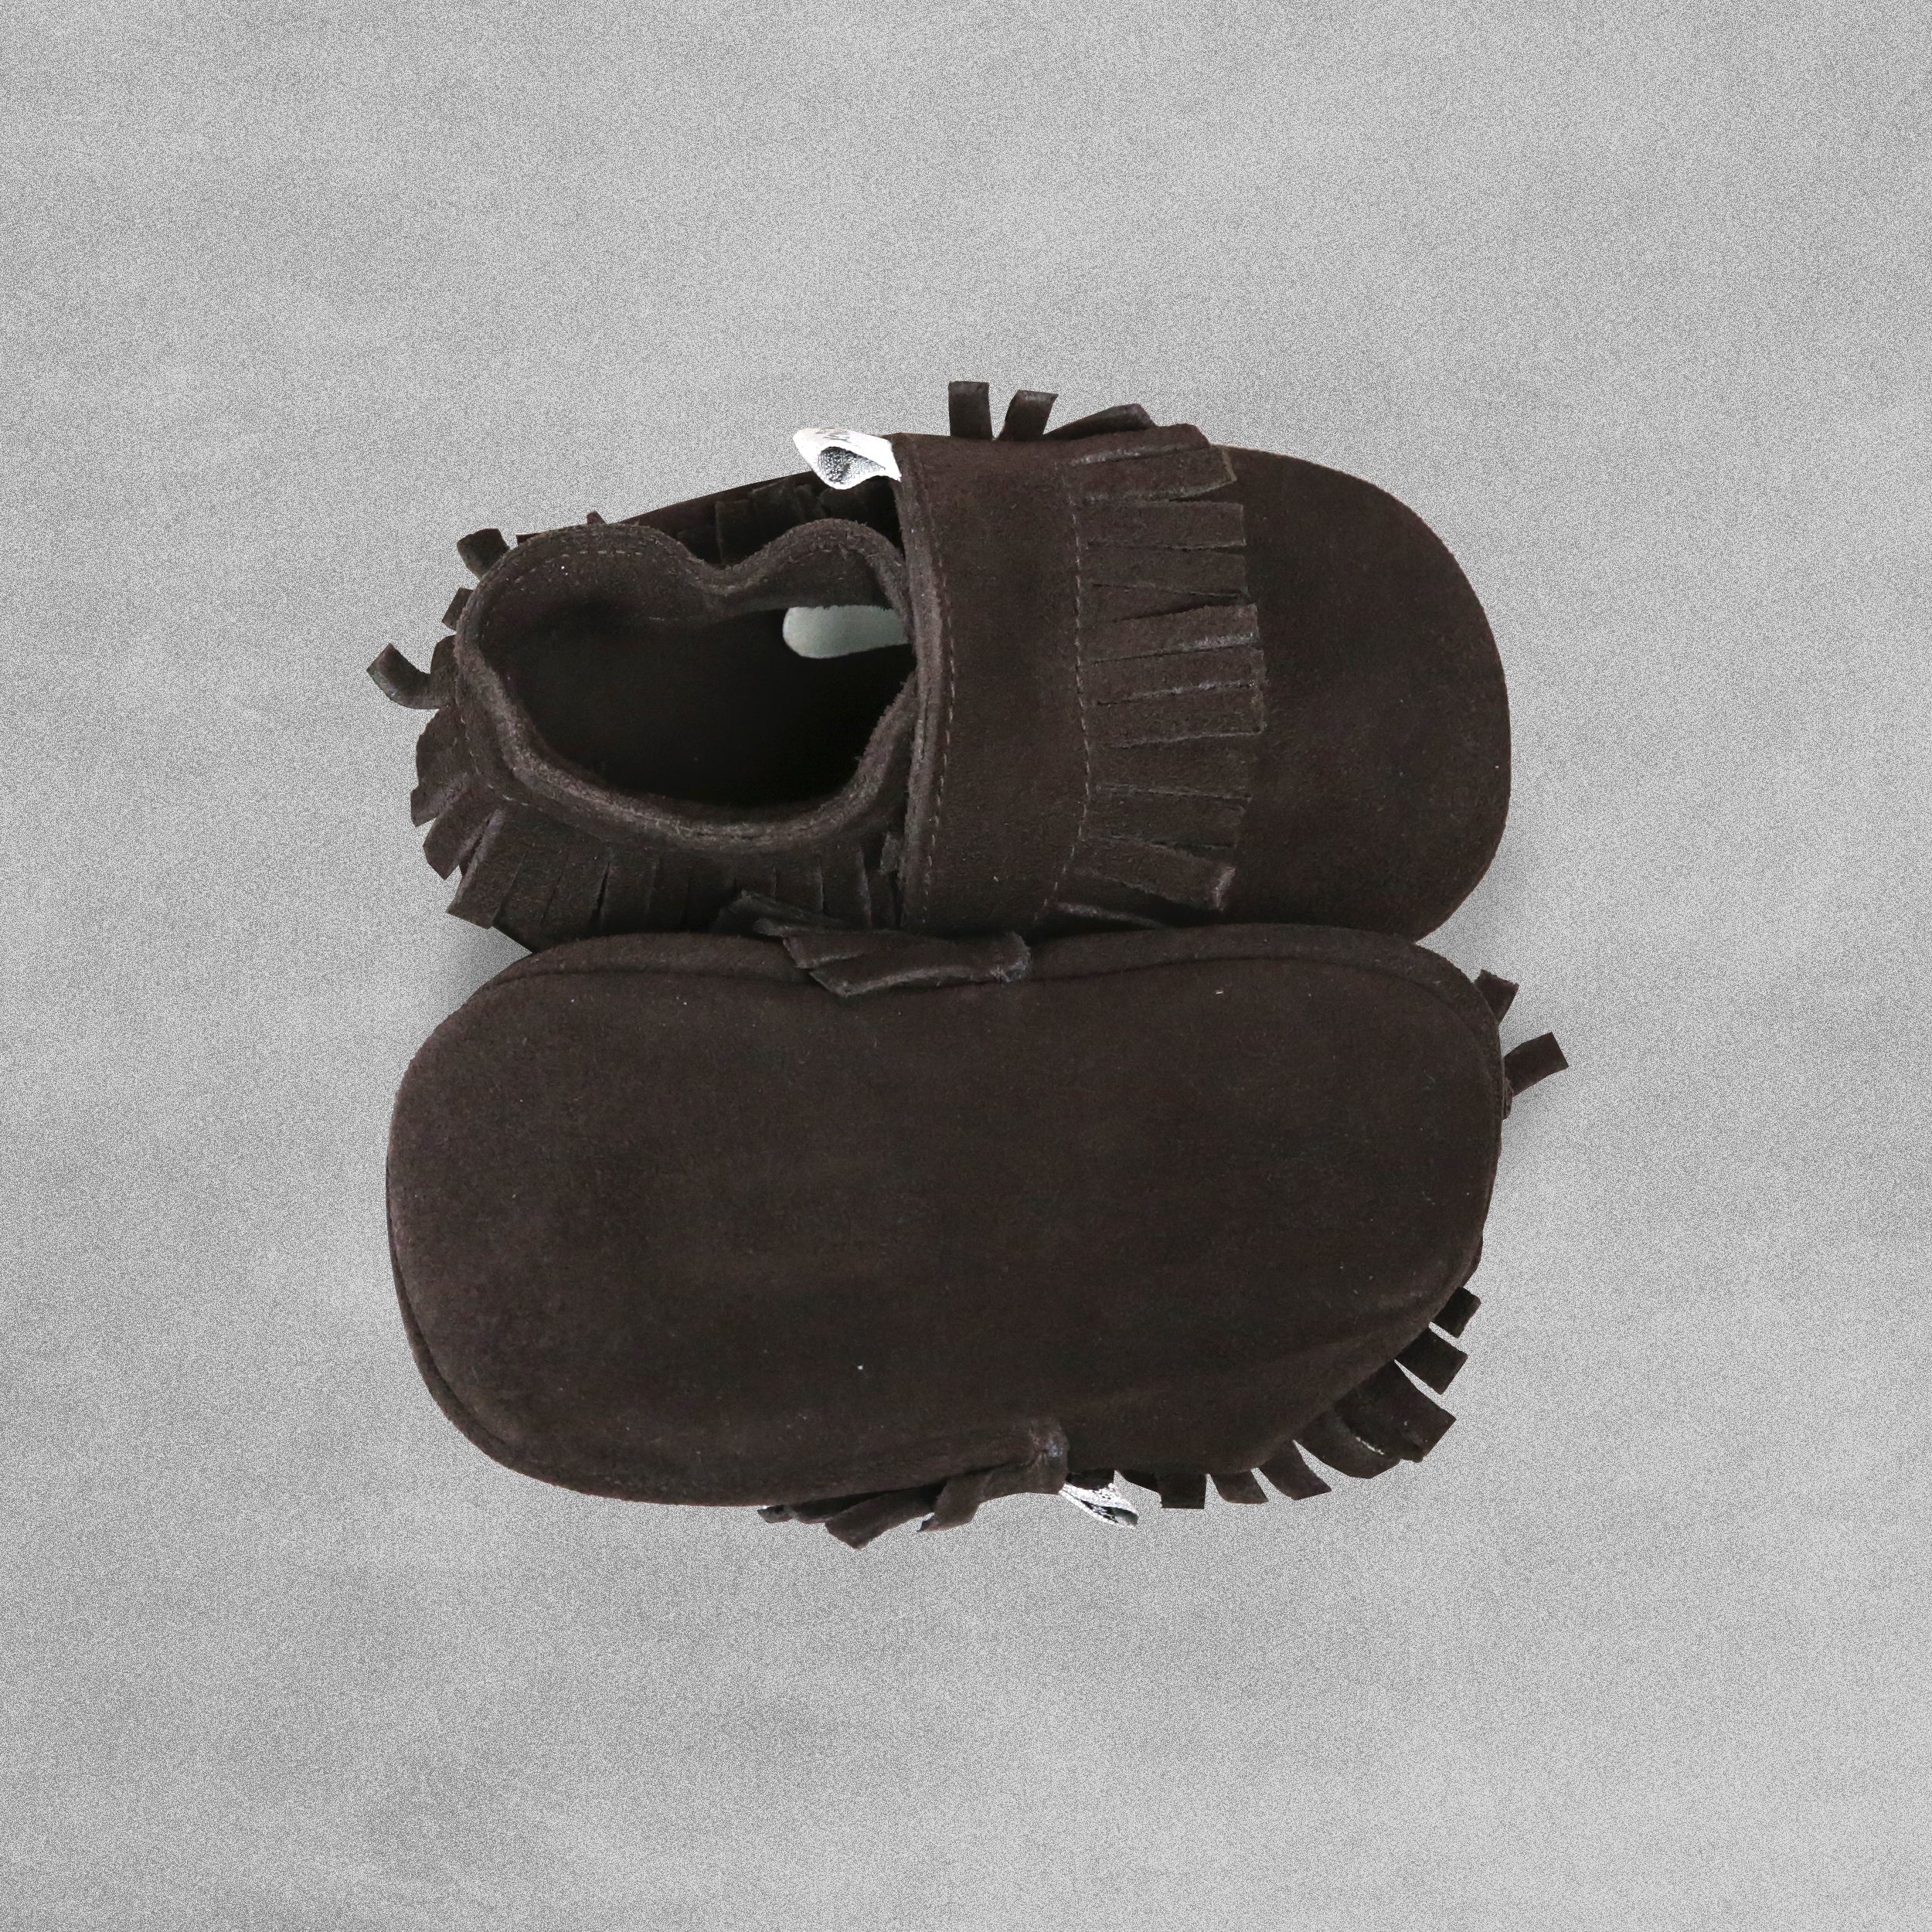 Bobux Soft Sole Baby Shoe 'Brown Moccasin' - Medium /9-15 Months